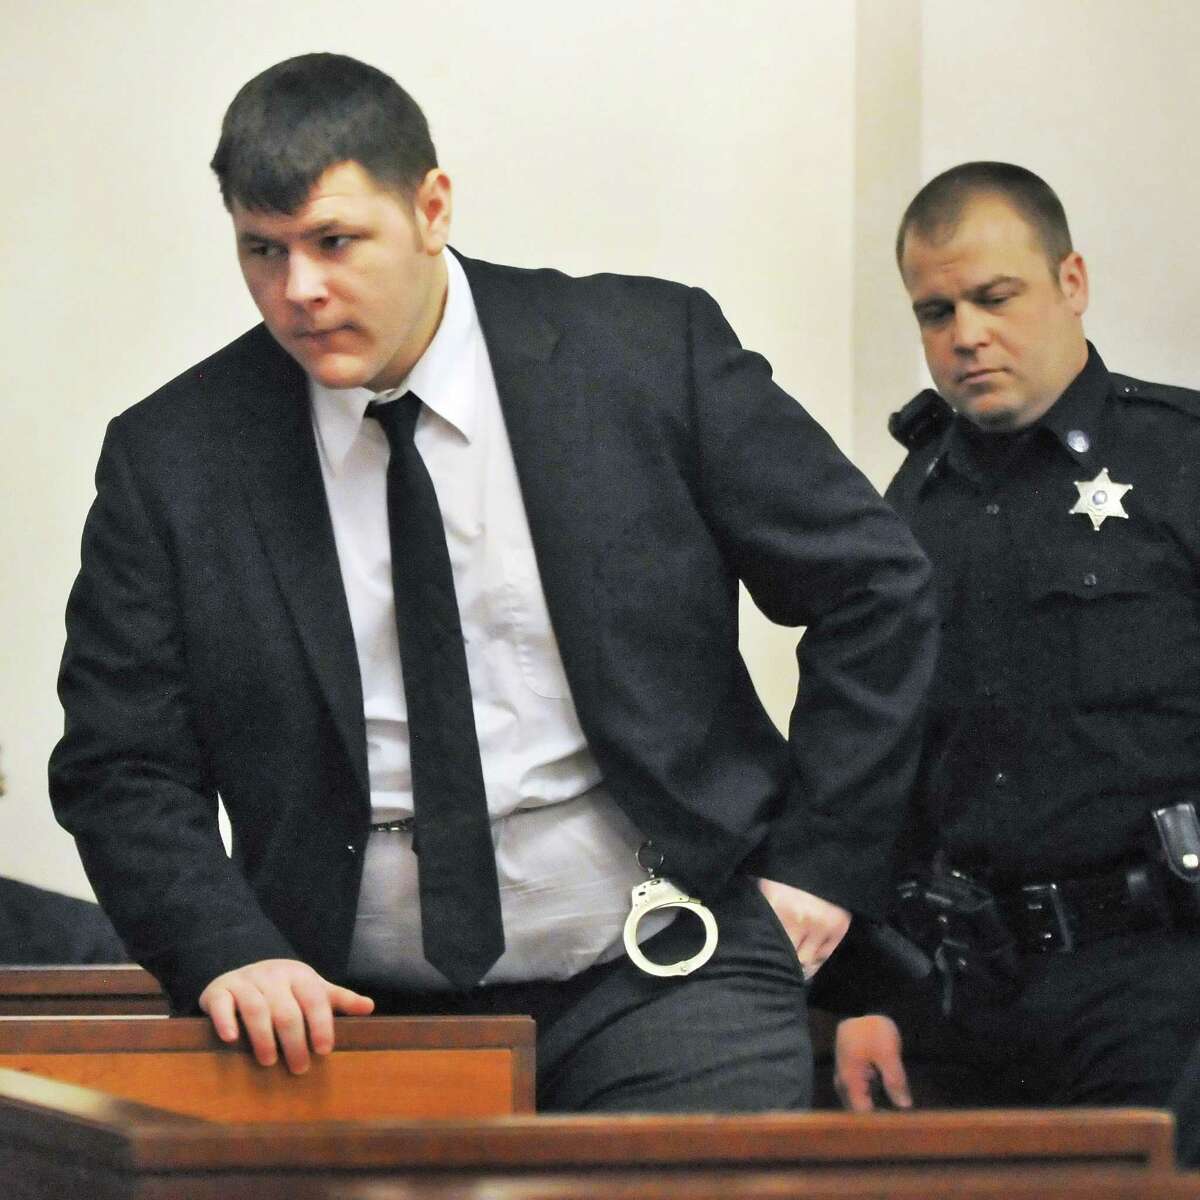 Matthew Slocum arrives for sentencing at the Washington County Court in Fort Edward N.Y., Friday March 30, 2012. Slocum was sentenced to 101 years to life in prison for killing his mother, stepfather and stepbrother inside their White Creek home last summer and setting the house on fire. (John Carl D'Annibale / Times Union archive)